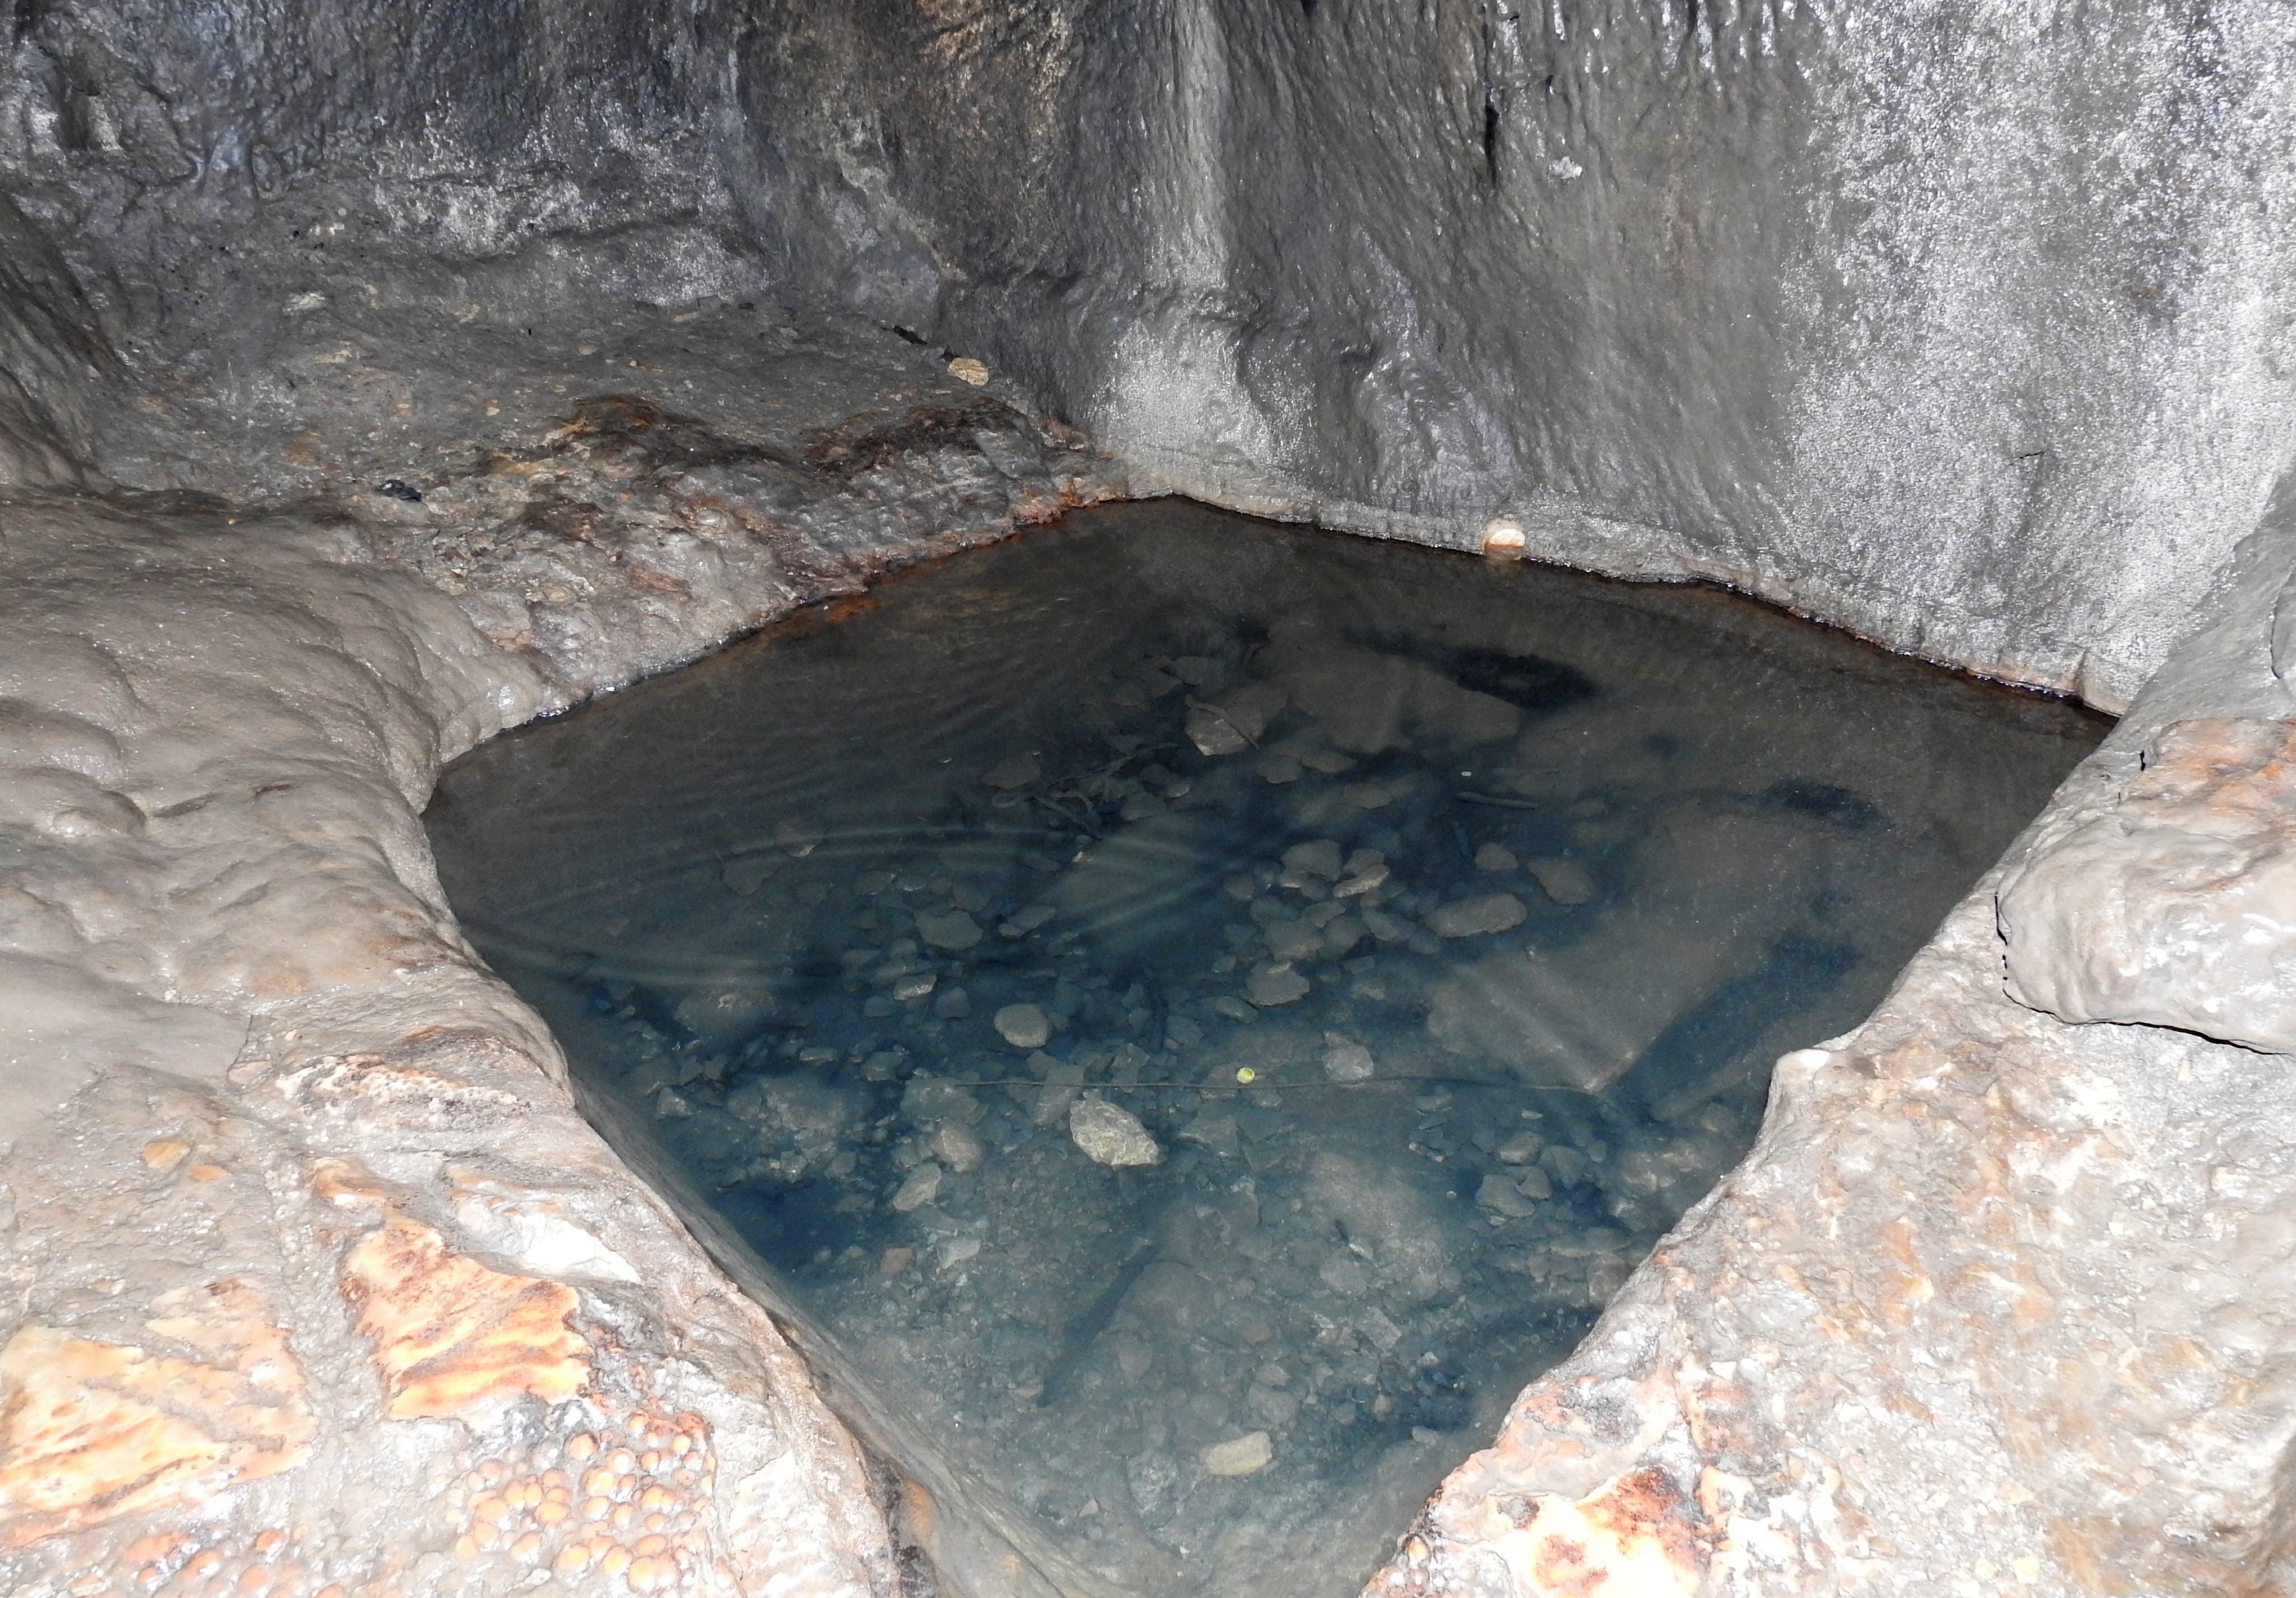 The hewn pool at the end of the trail